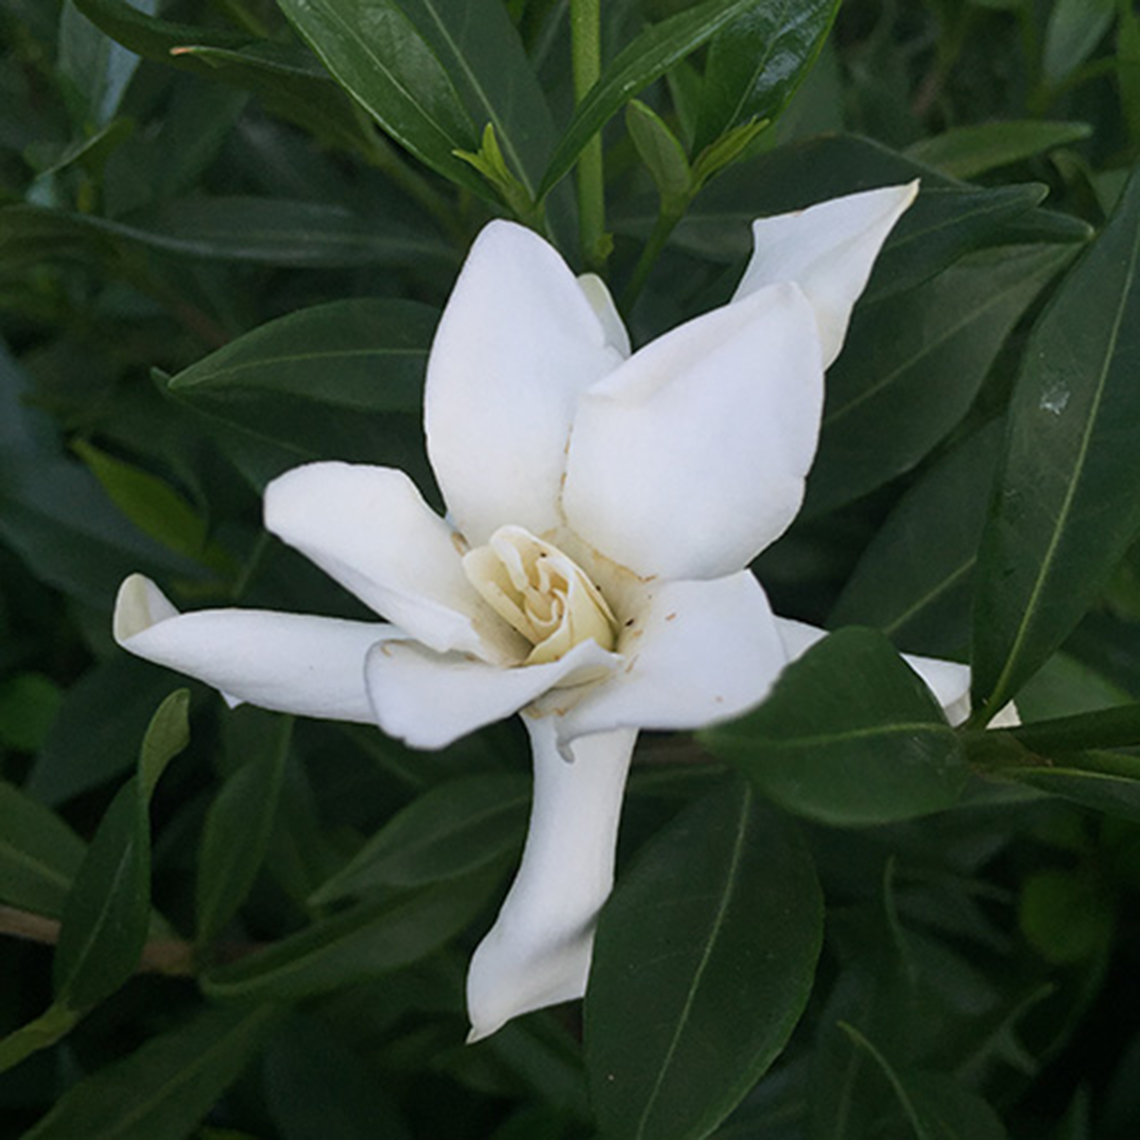 Close up of white Frost Proof Gardenia bloom cradled by glossy green foliage